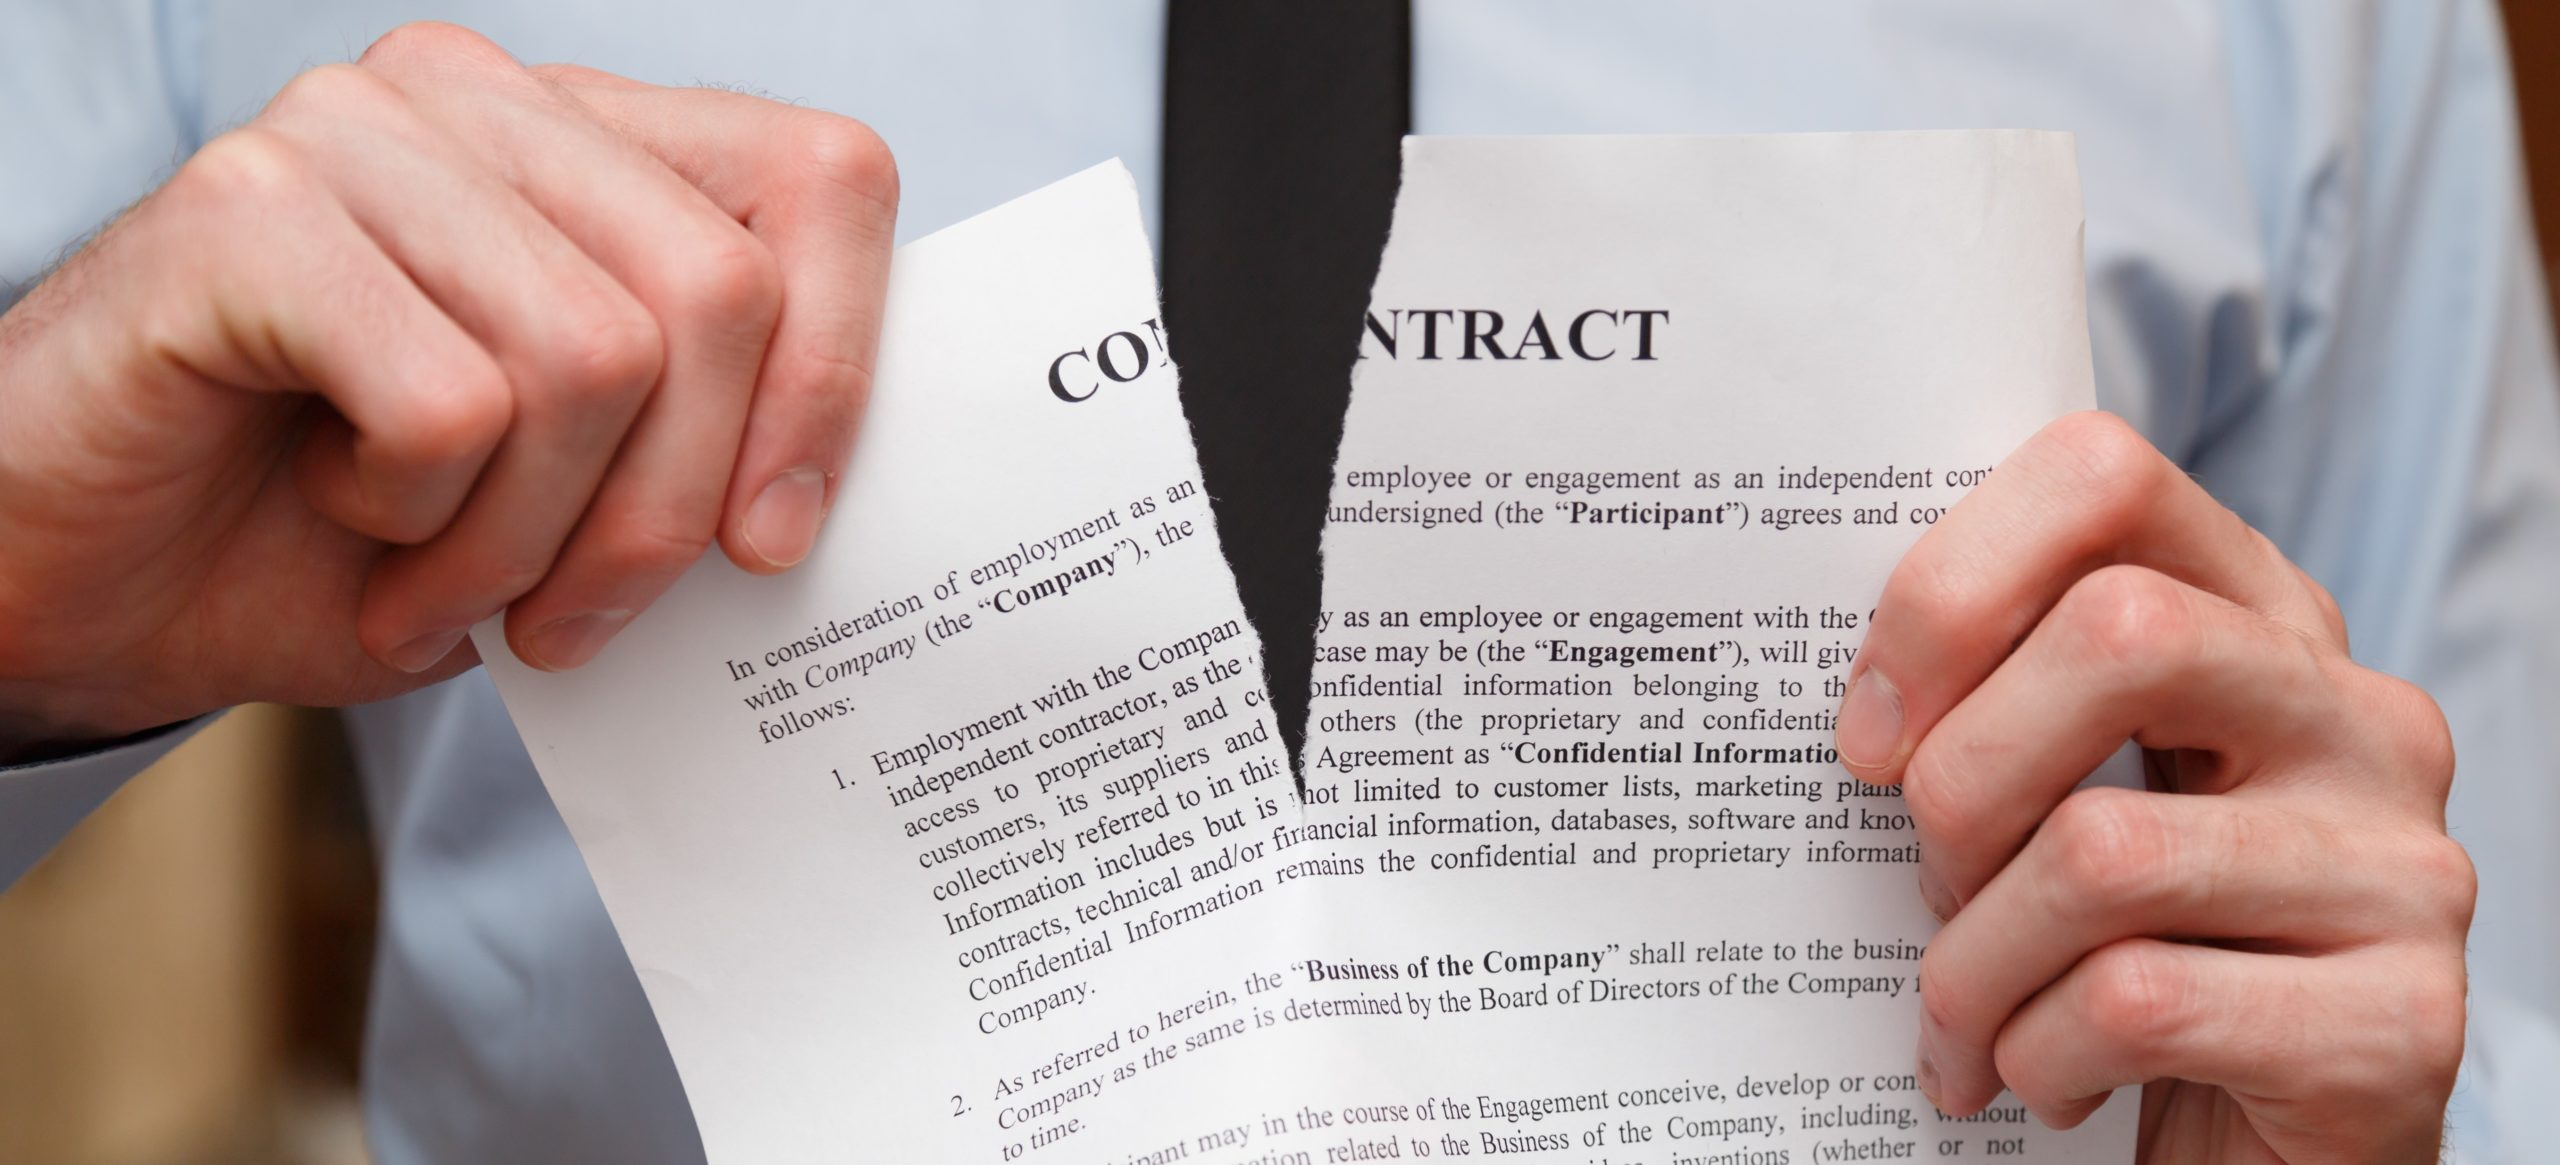 Man tearing contract in half